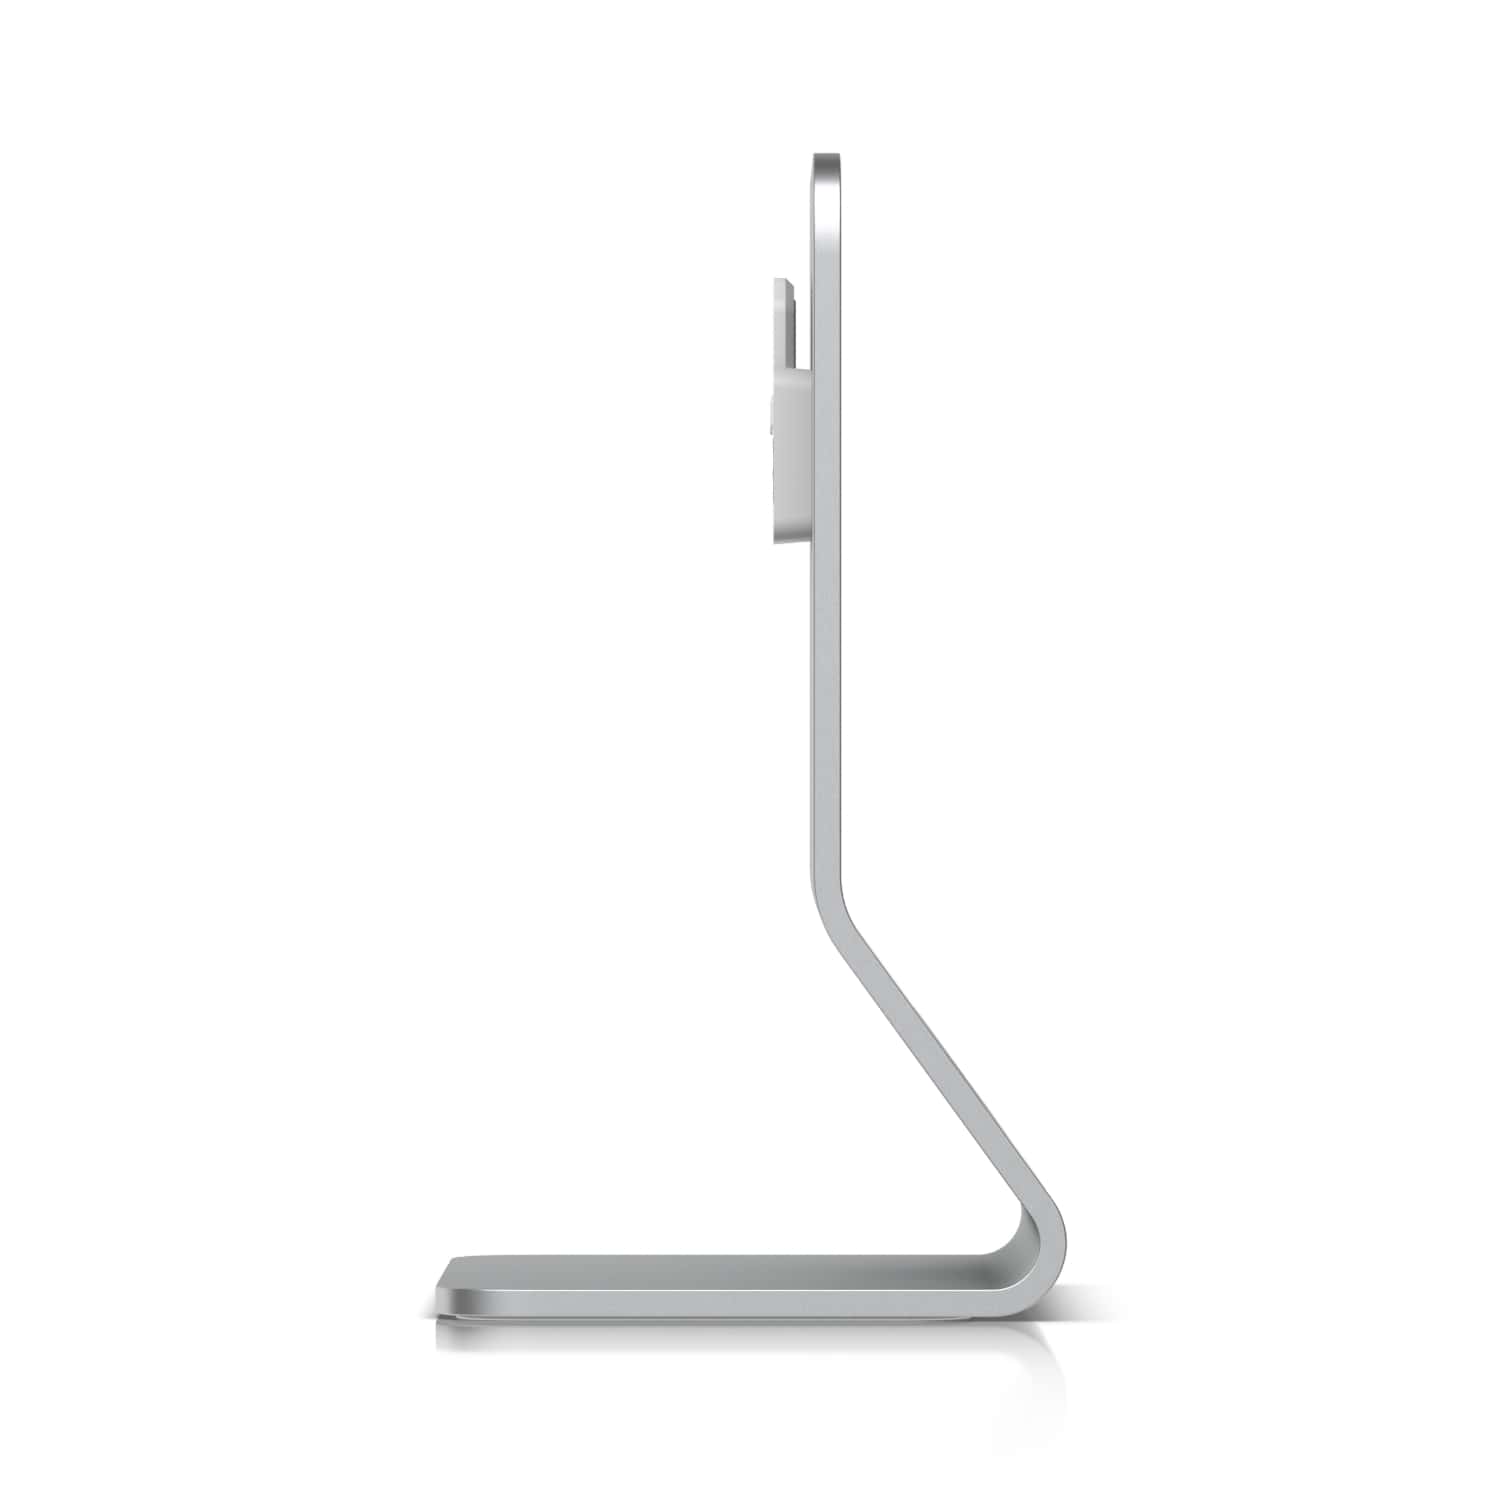 Ubiquiti Mobile Router Table Stand, Sleek, Metal Table Stand For Mobile Router (UMR), Incl 2Yr Warr